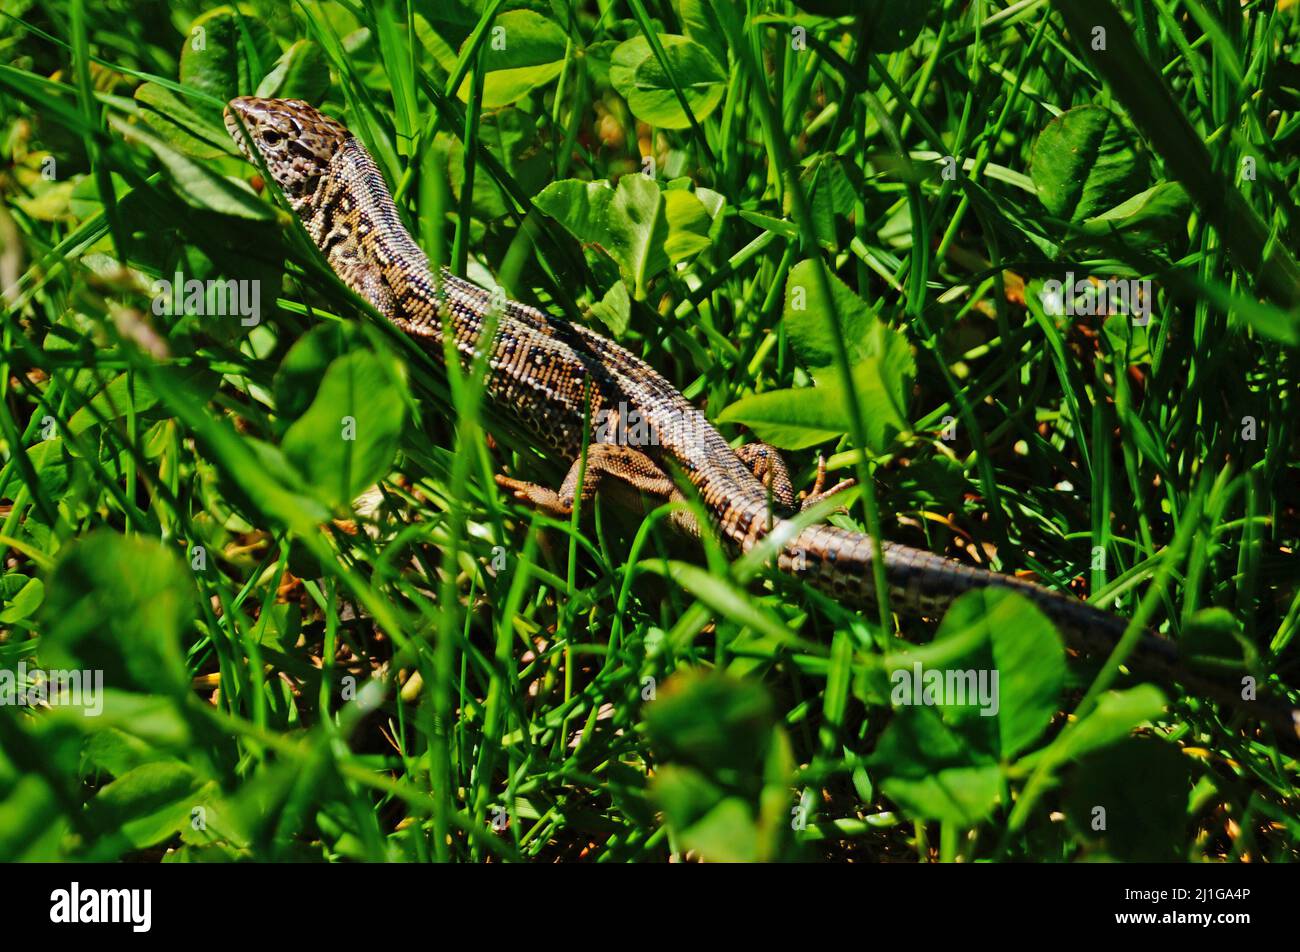 A lizard with shiny skin sits in the green grass on a sunny summer day Stock Photo